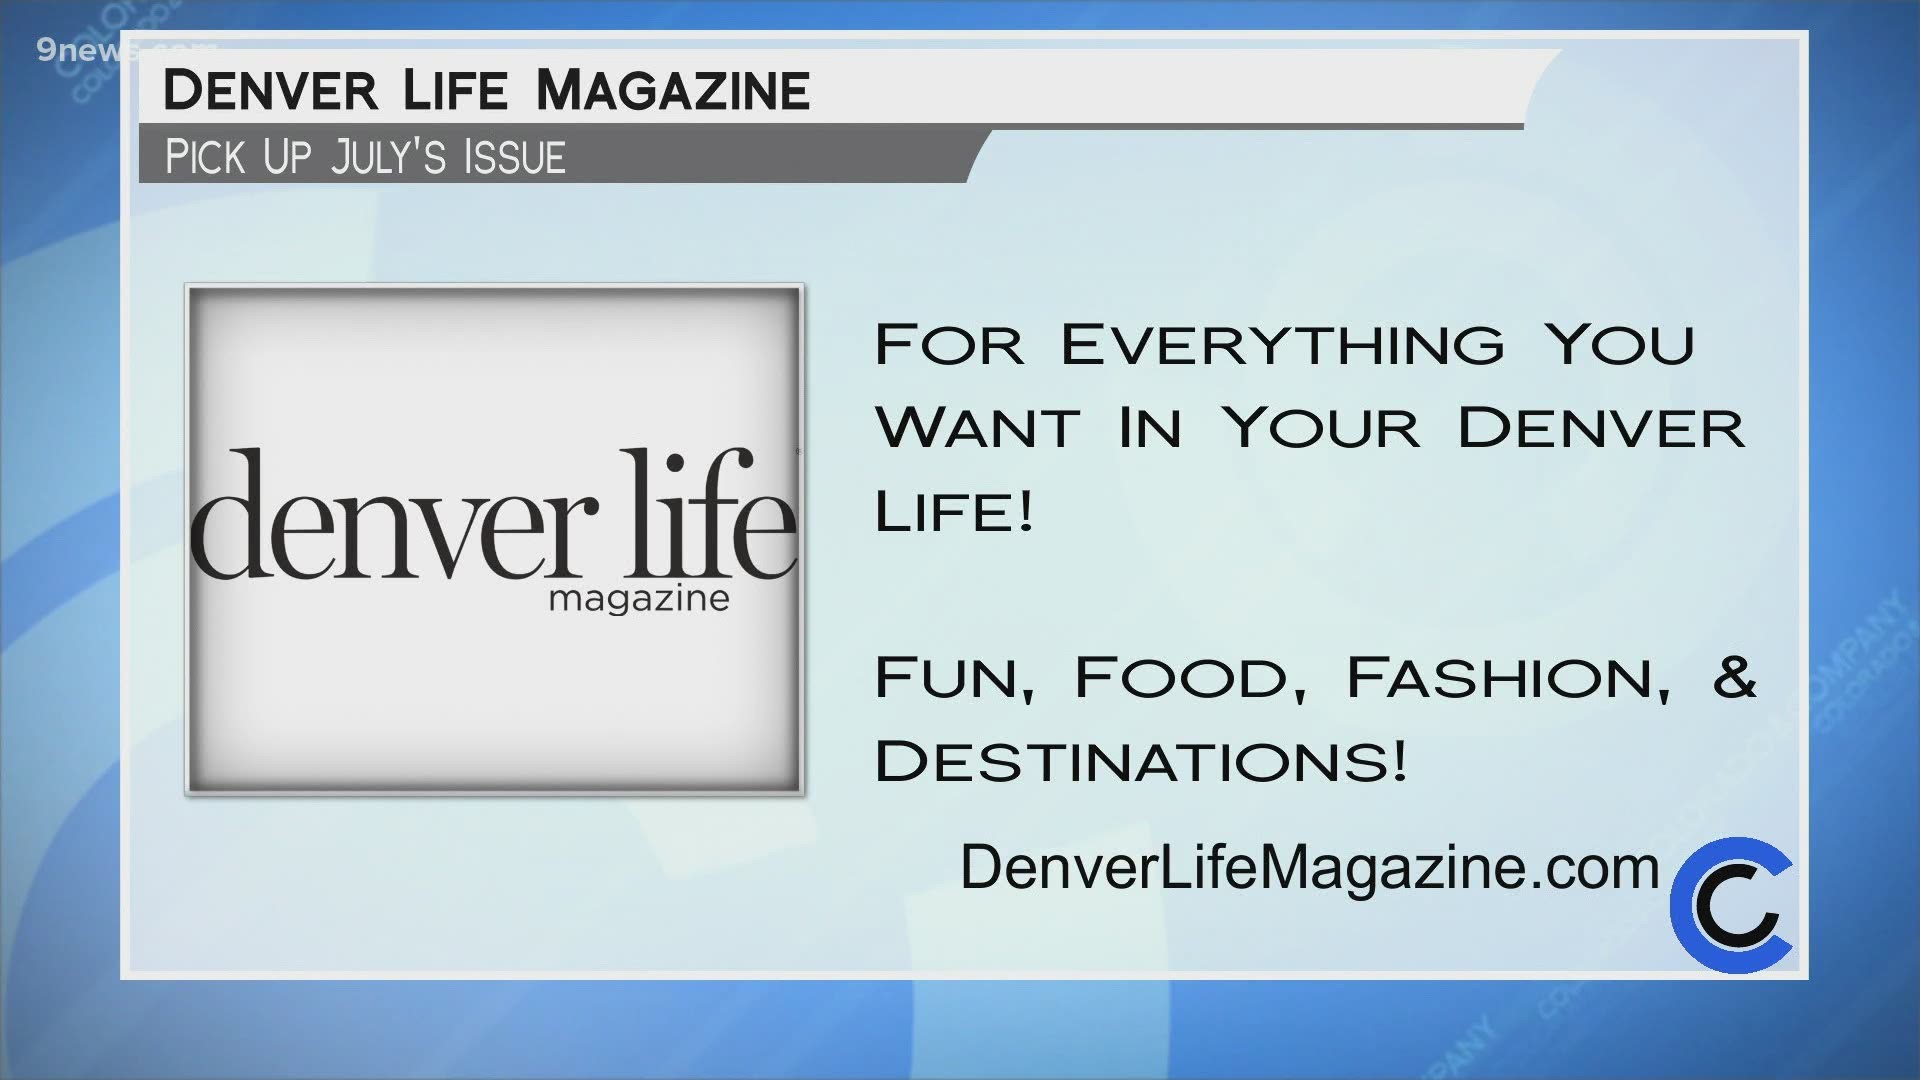 Pick up a copy of July's Denver Life Magazine at King Soopers, Safeway, Barnes and Noble or Tattered Cover. You can also subscribe online at DenverLifemagazine.com.